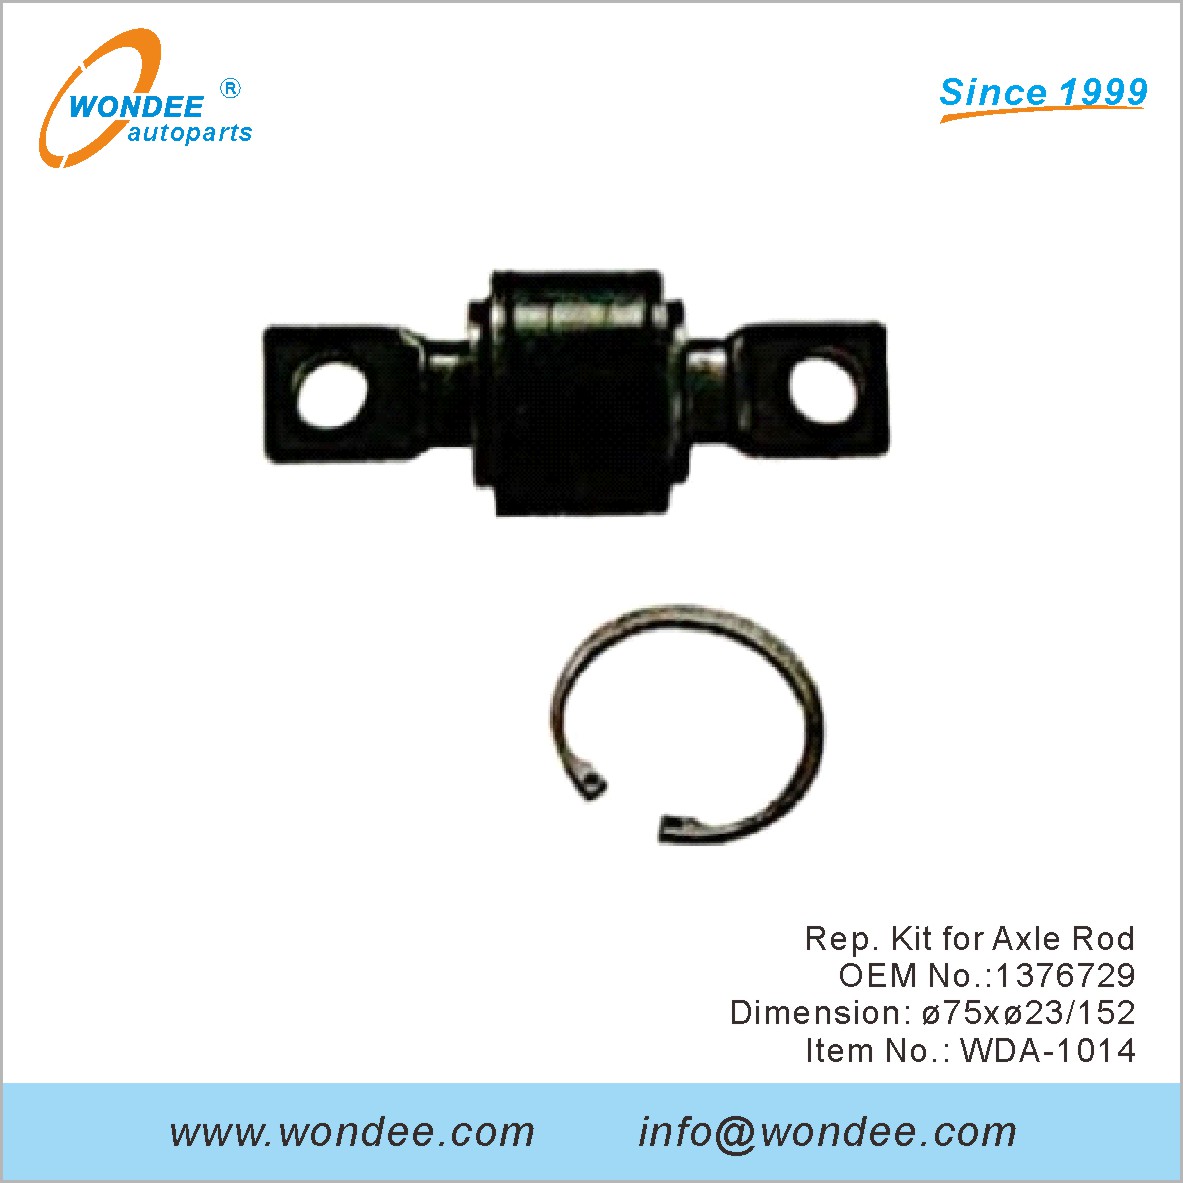 Rep. Kit for Axle Rod OEM 1376729 for DAF from WONDEE